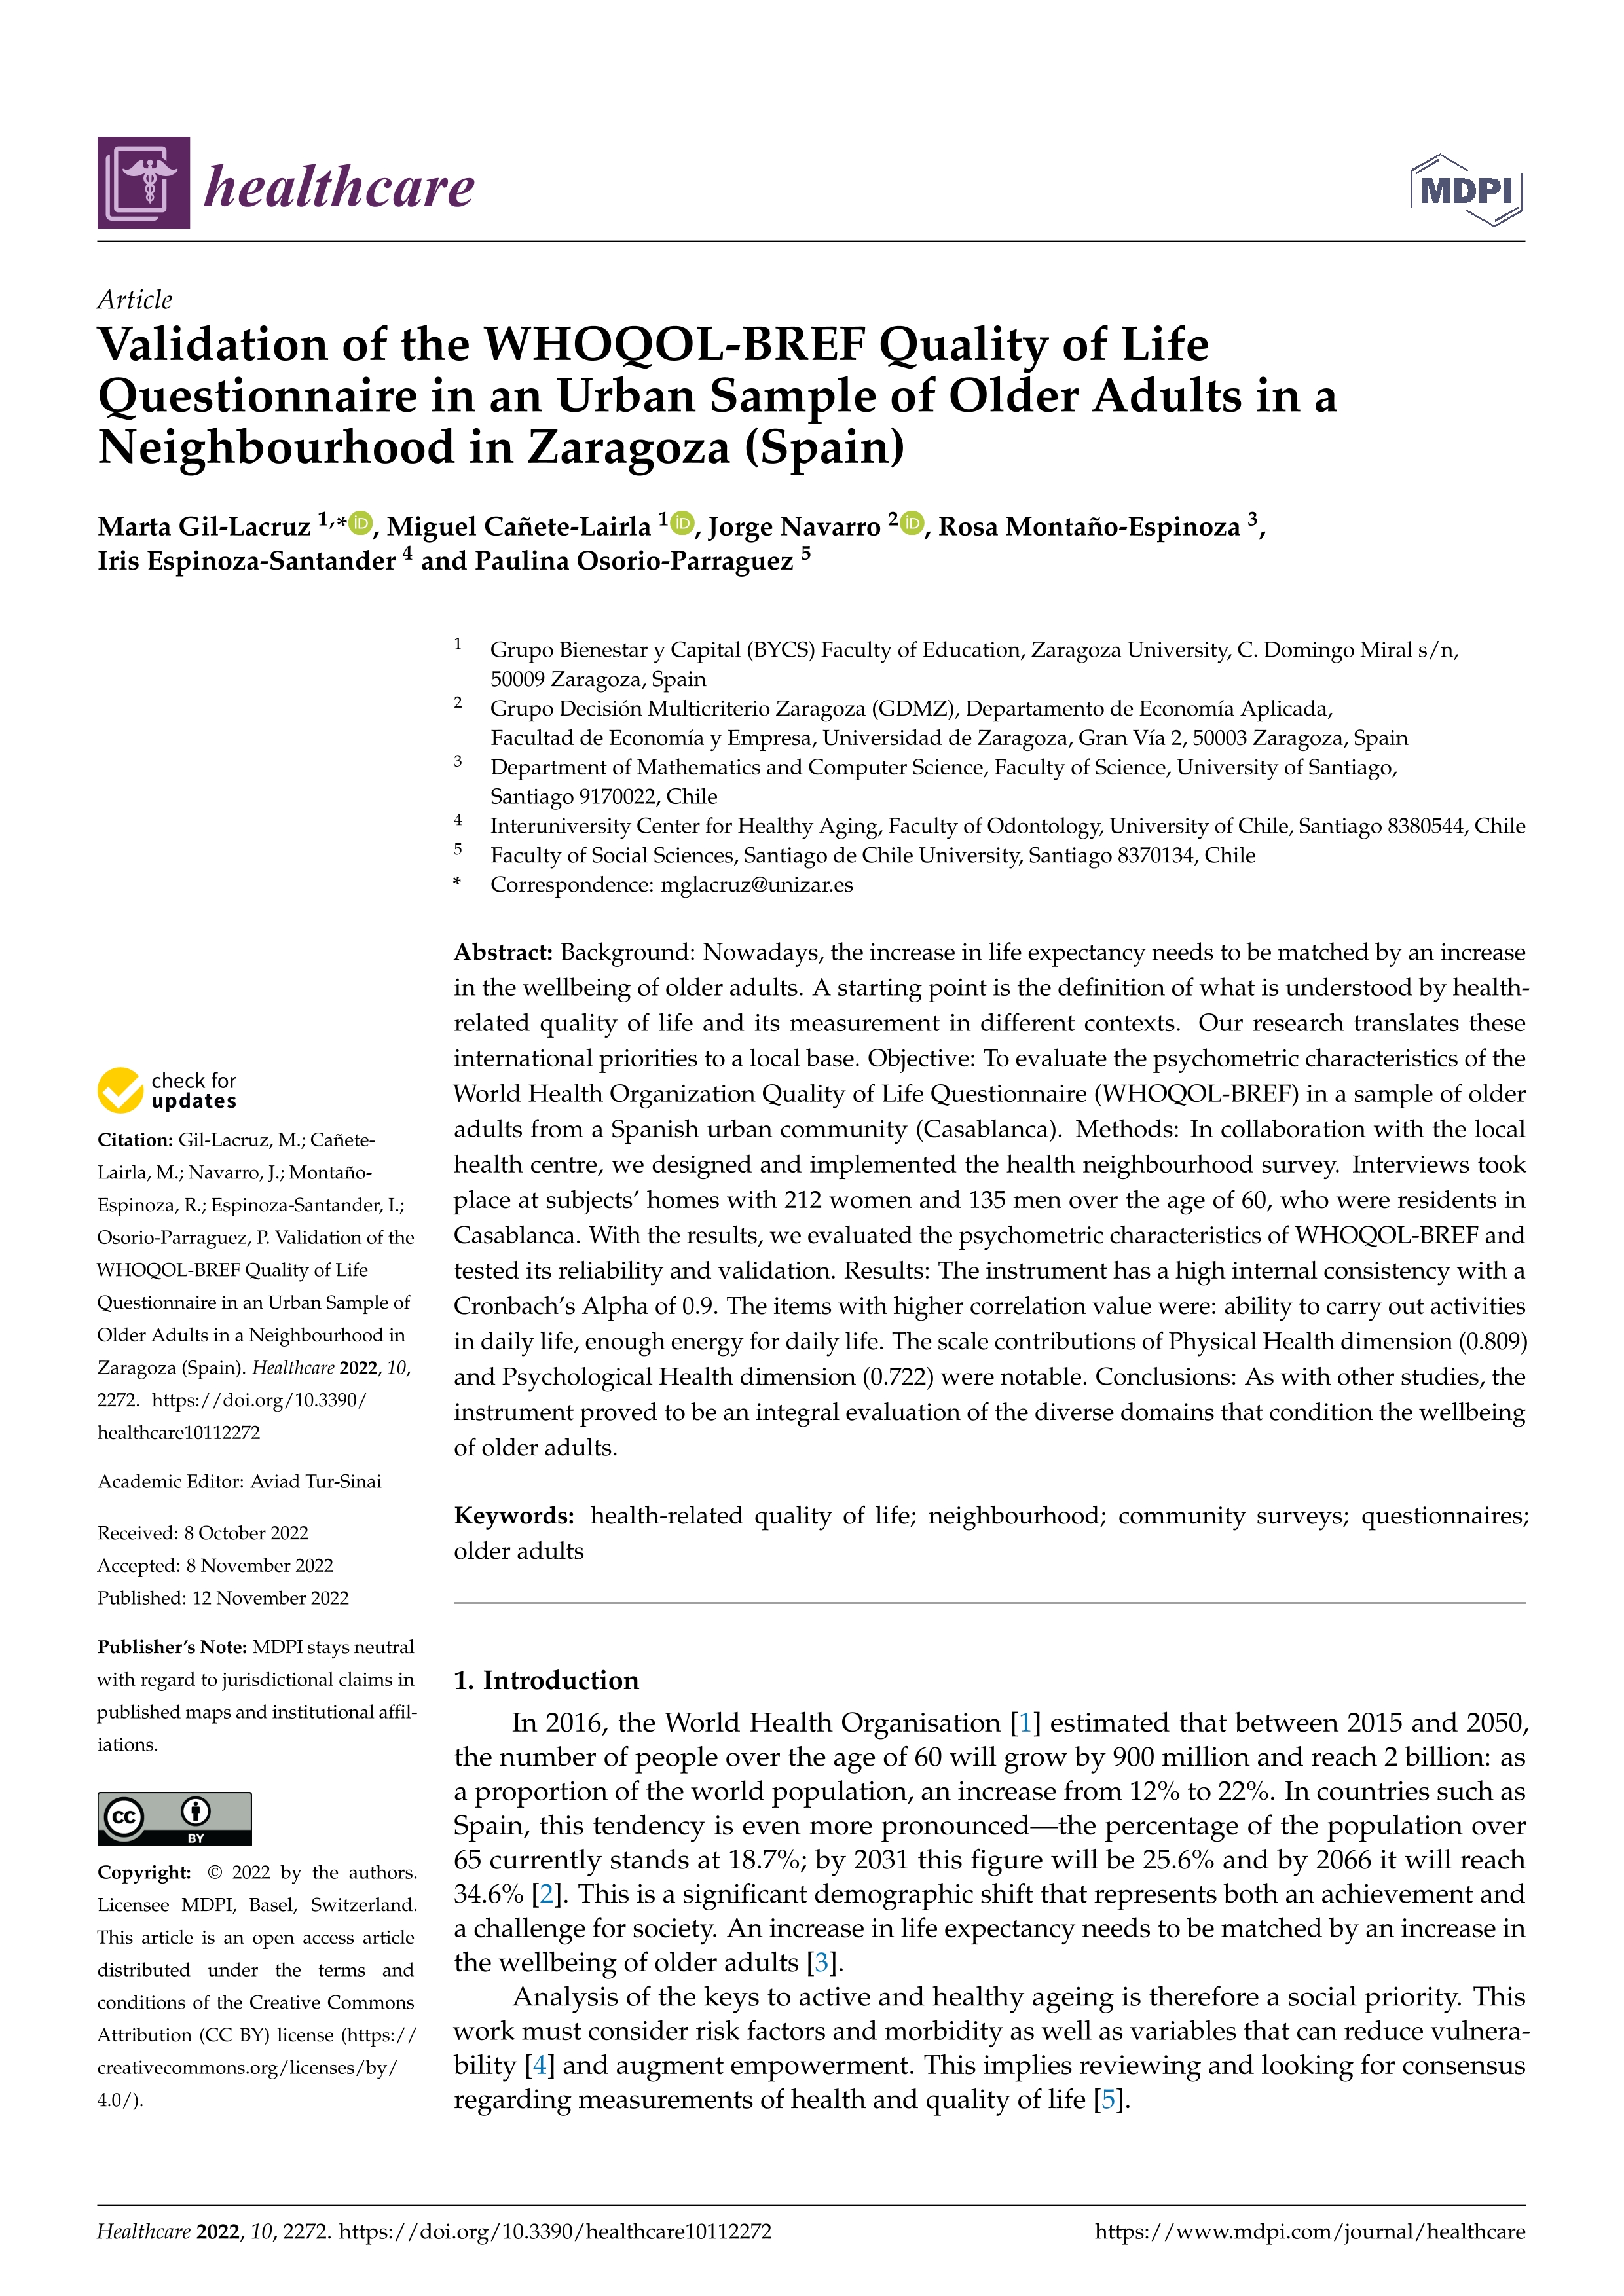 Validation of theWHOQOL-BREF quality of life questionnaire in an urban sample of older adults in a neighbourhood in zaragoza (spain)